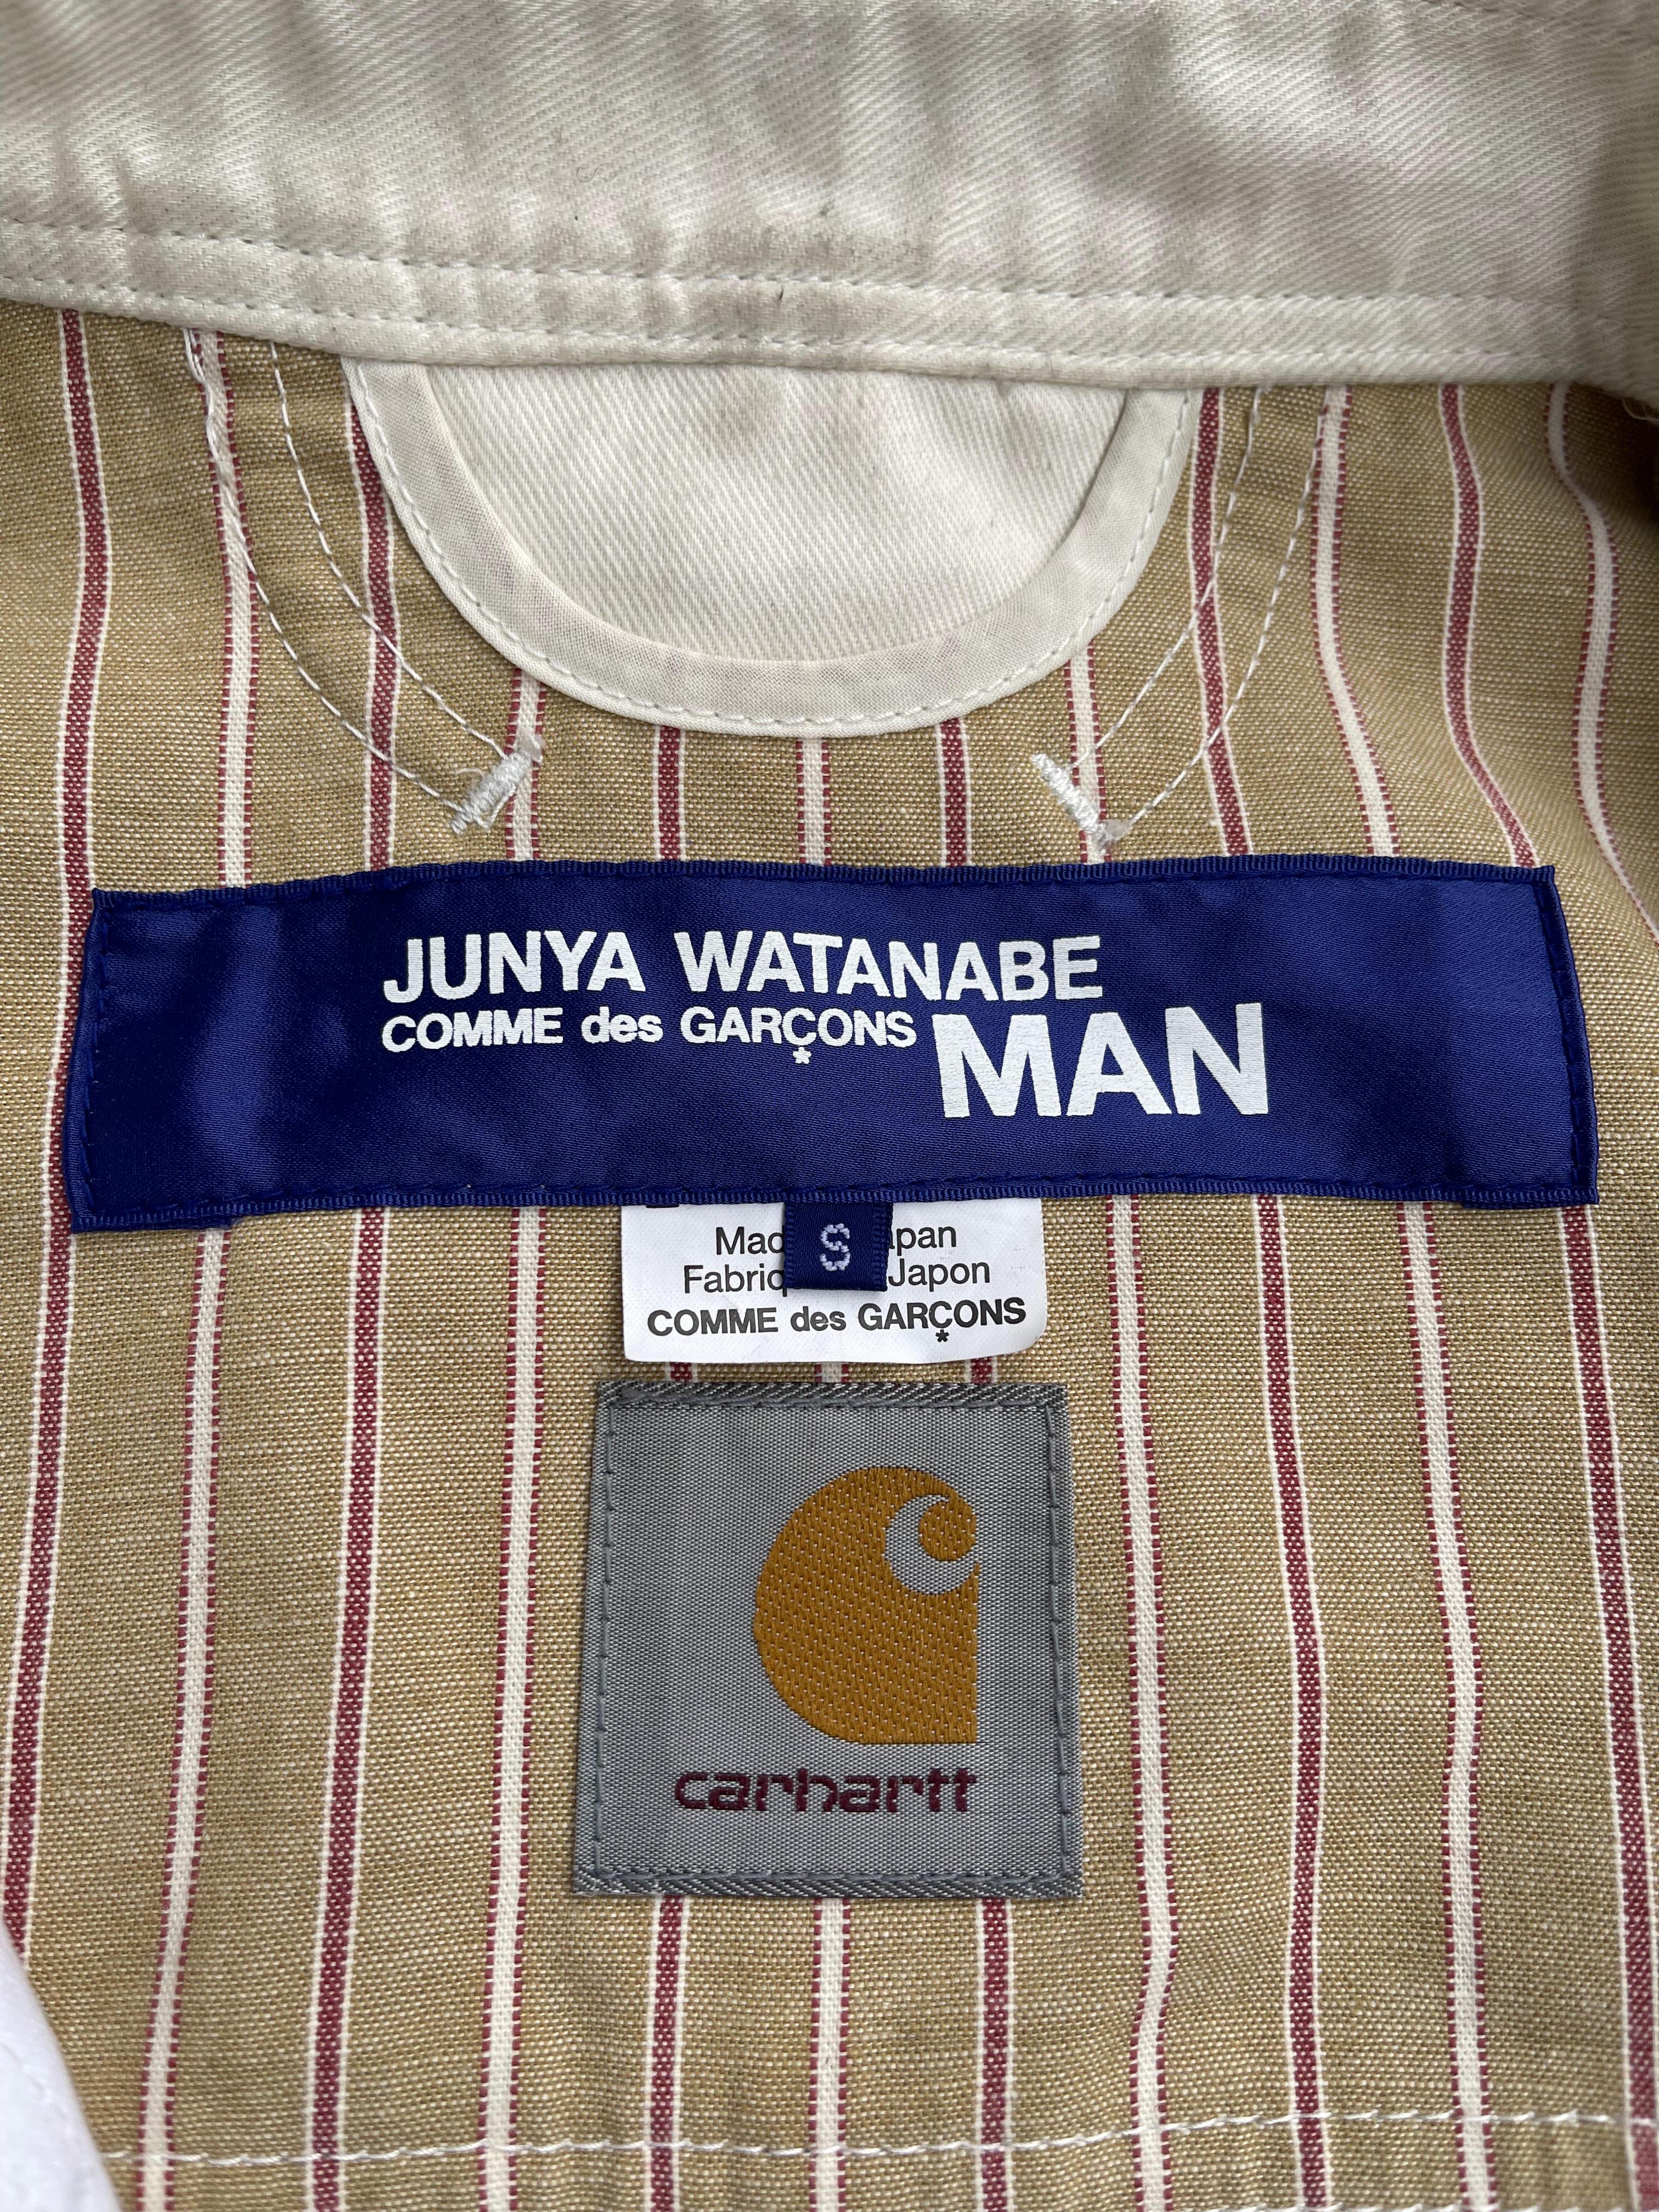 Comme Des Garcons x Junya Watanabe Carhartt Coverall Jacket, Spring Summer 2018 In Good Condition For Sale In Tương Mai Ward, Hoang Mai District